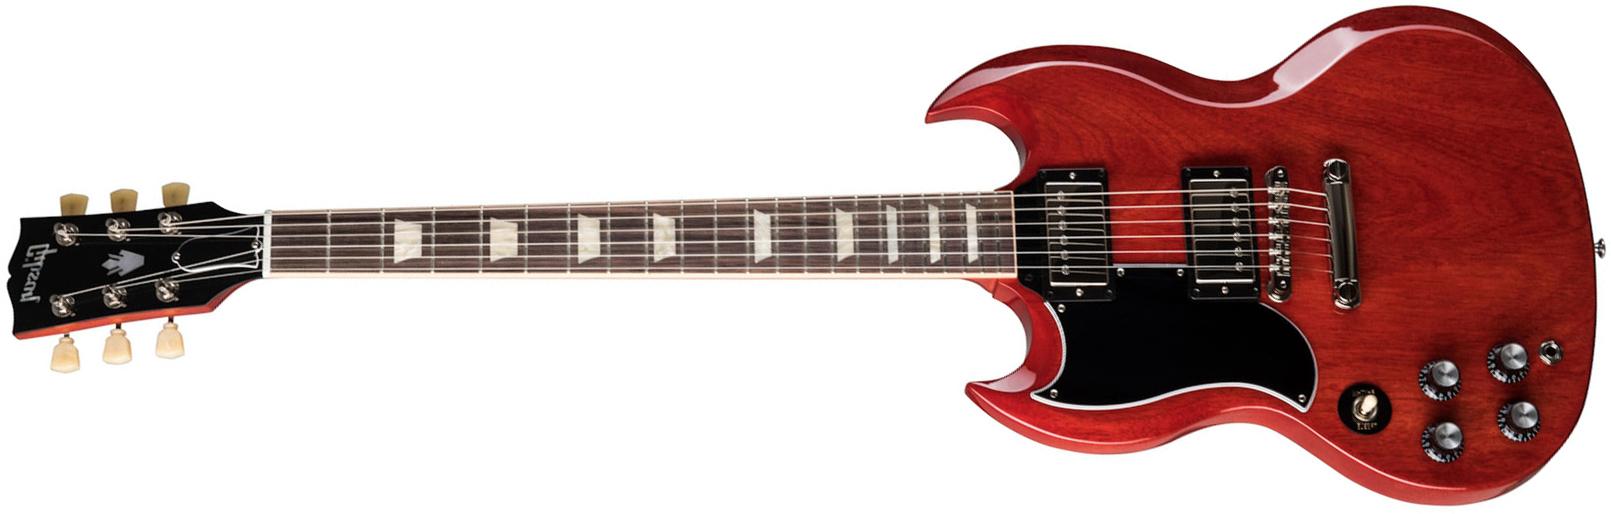 Gibson Sg Standard '61 Lh Gaucher 2h Ht Rw - Vintage Cherry - Left-handed electric guitar - Main picture